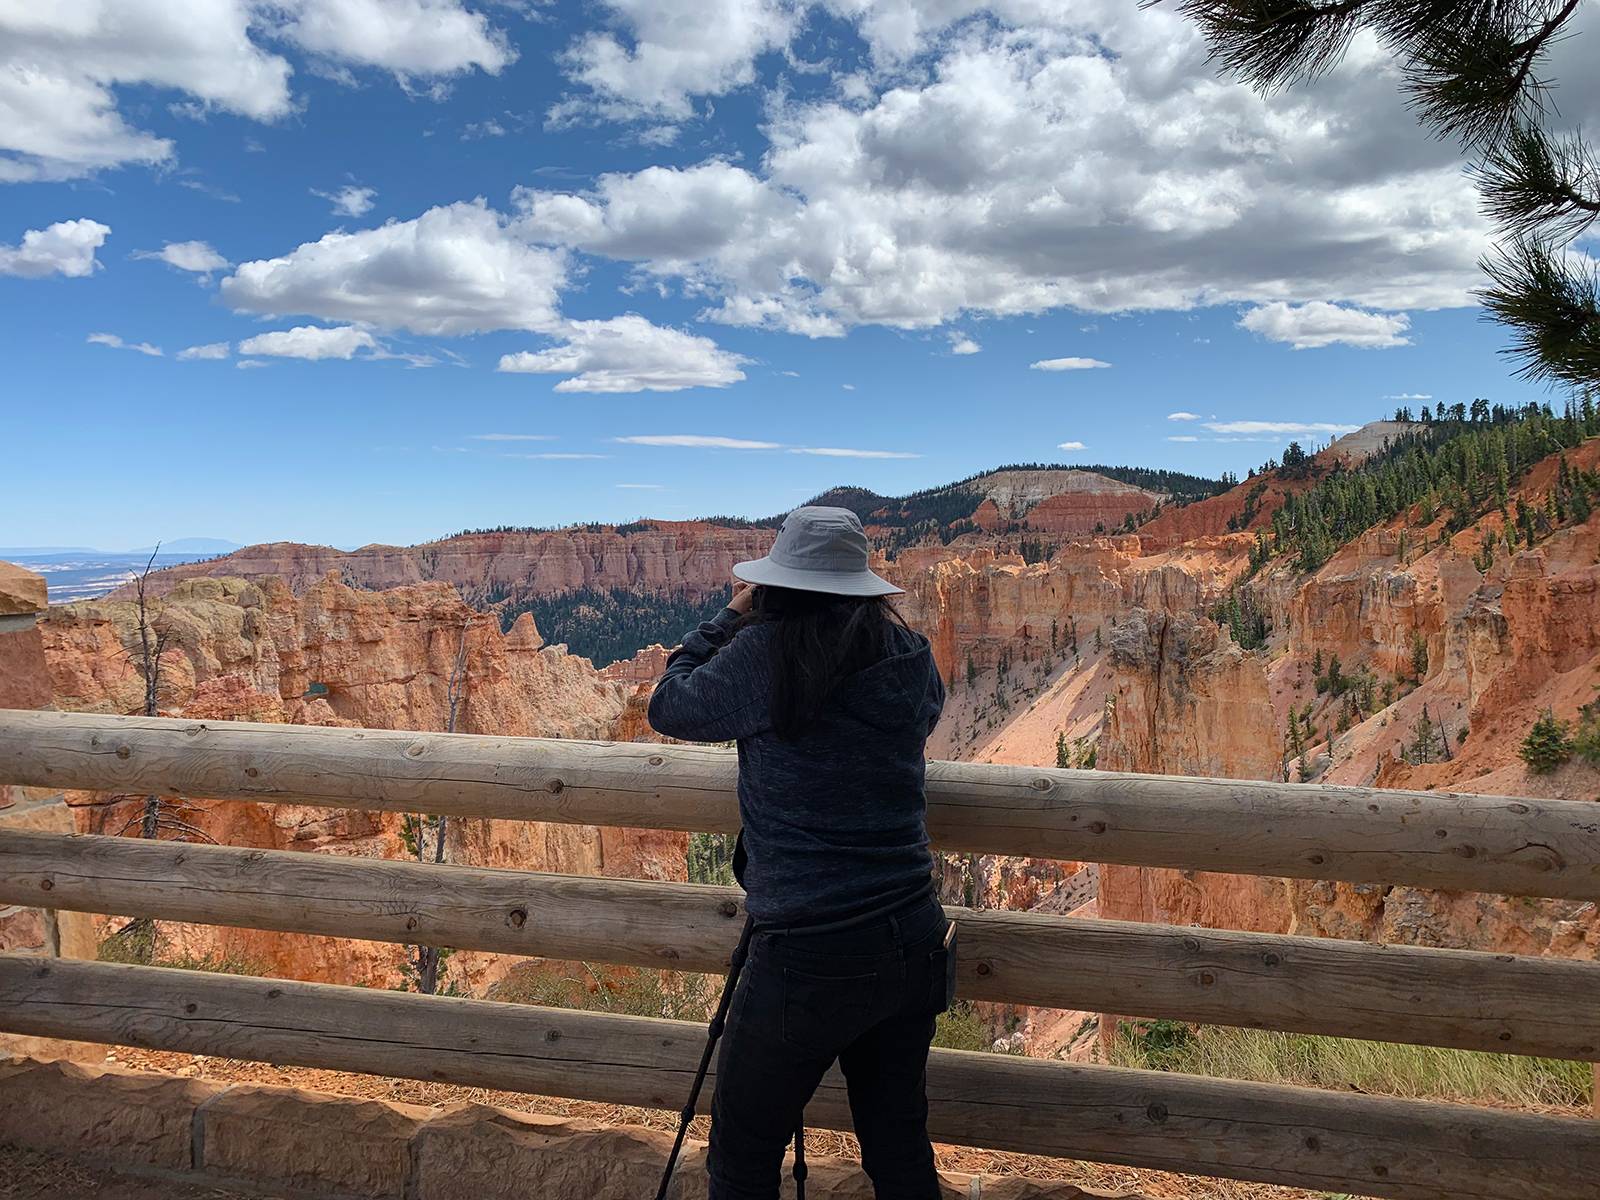 We took a lot of amazing photos and videos at Bryce Canyon